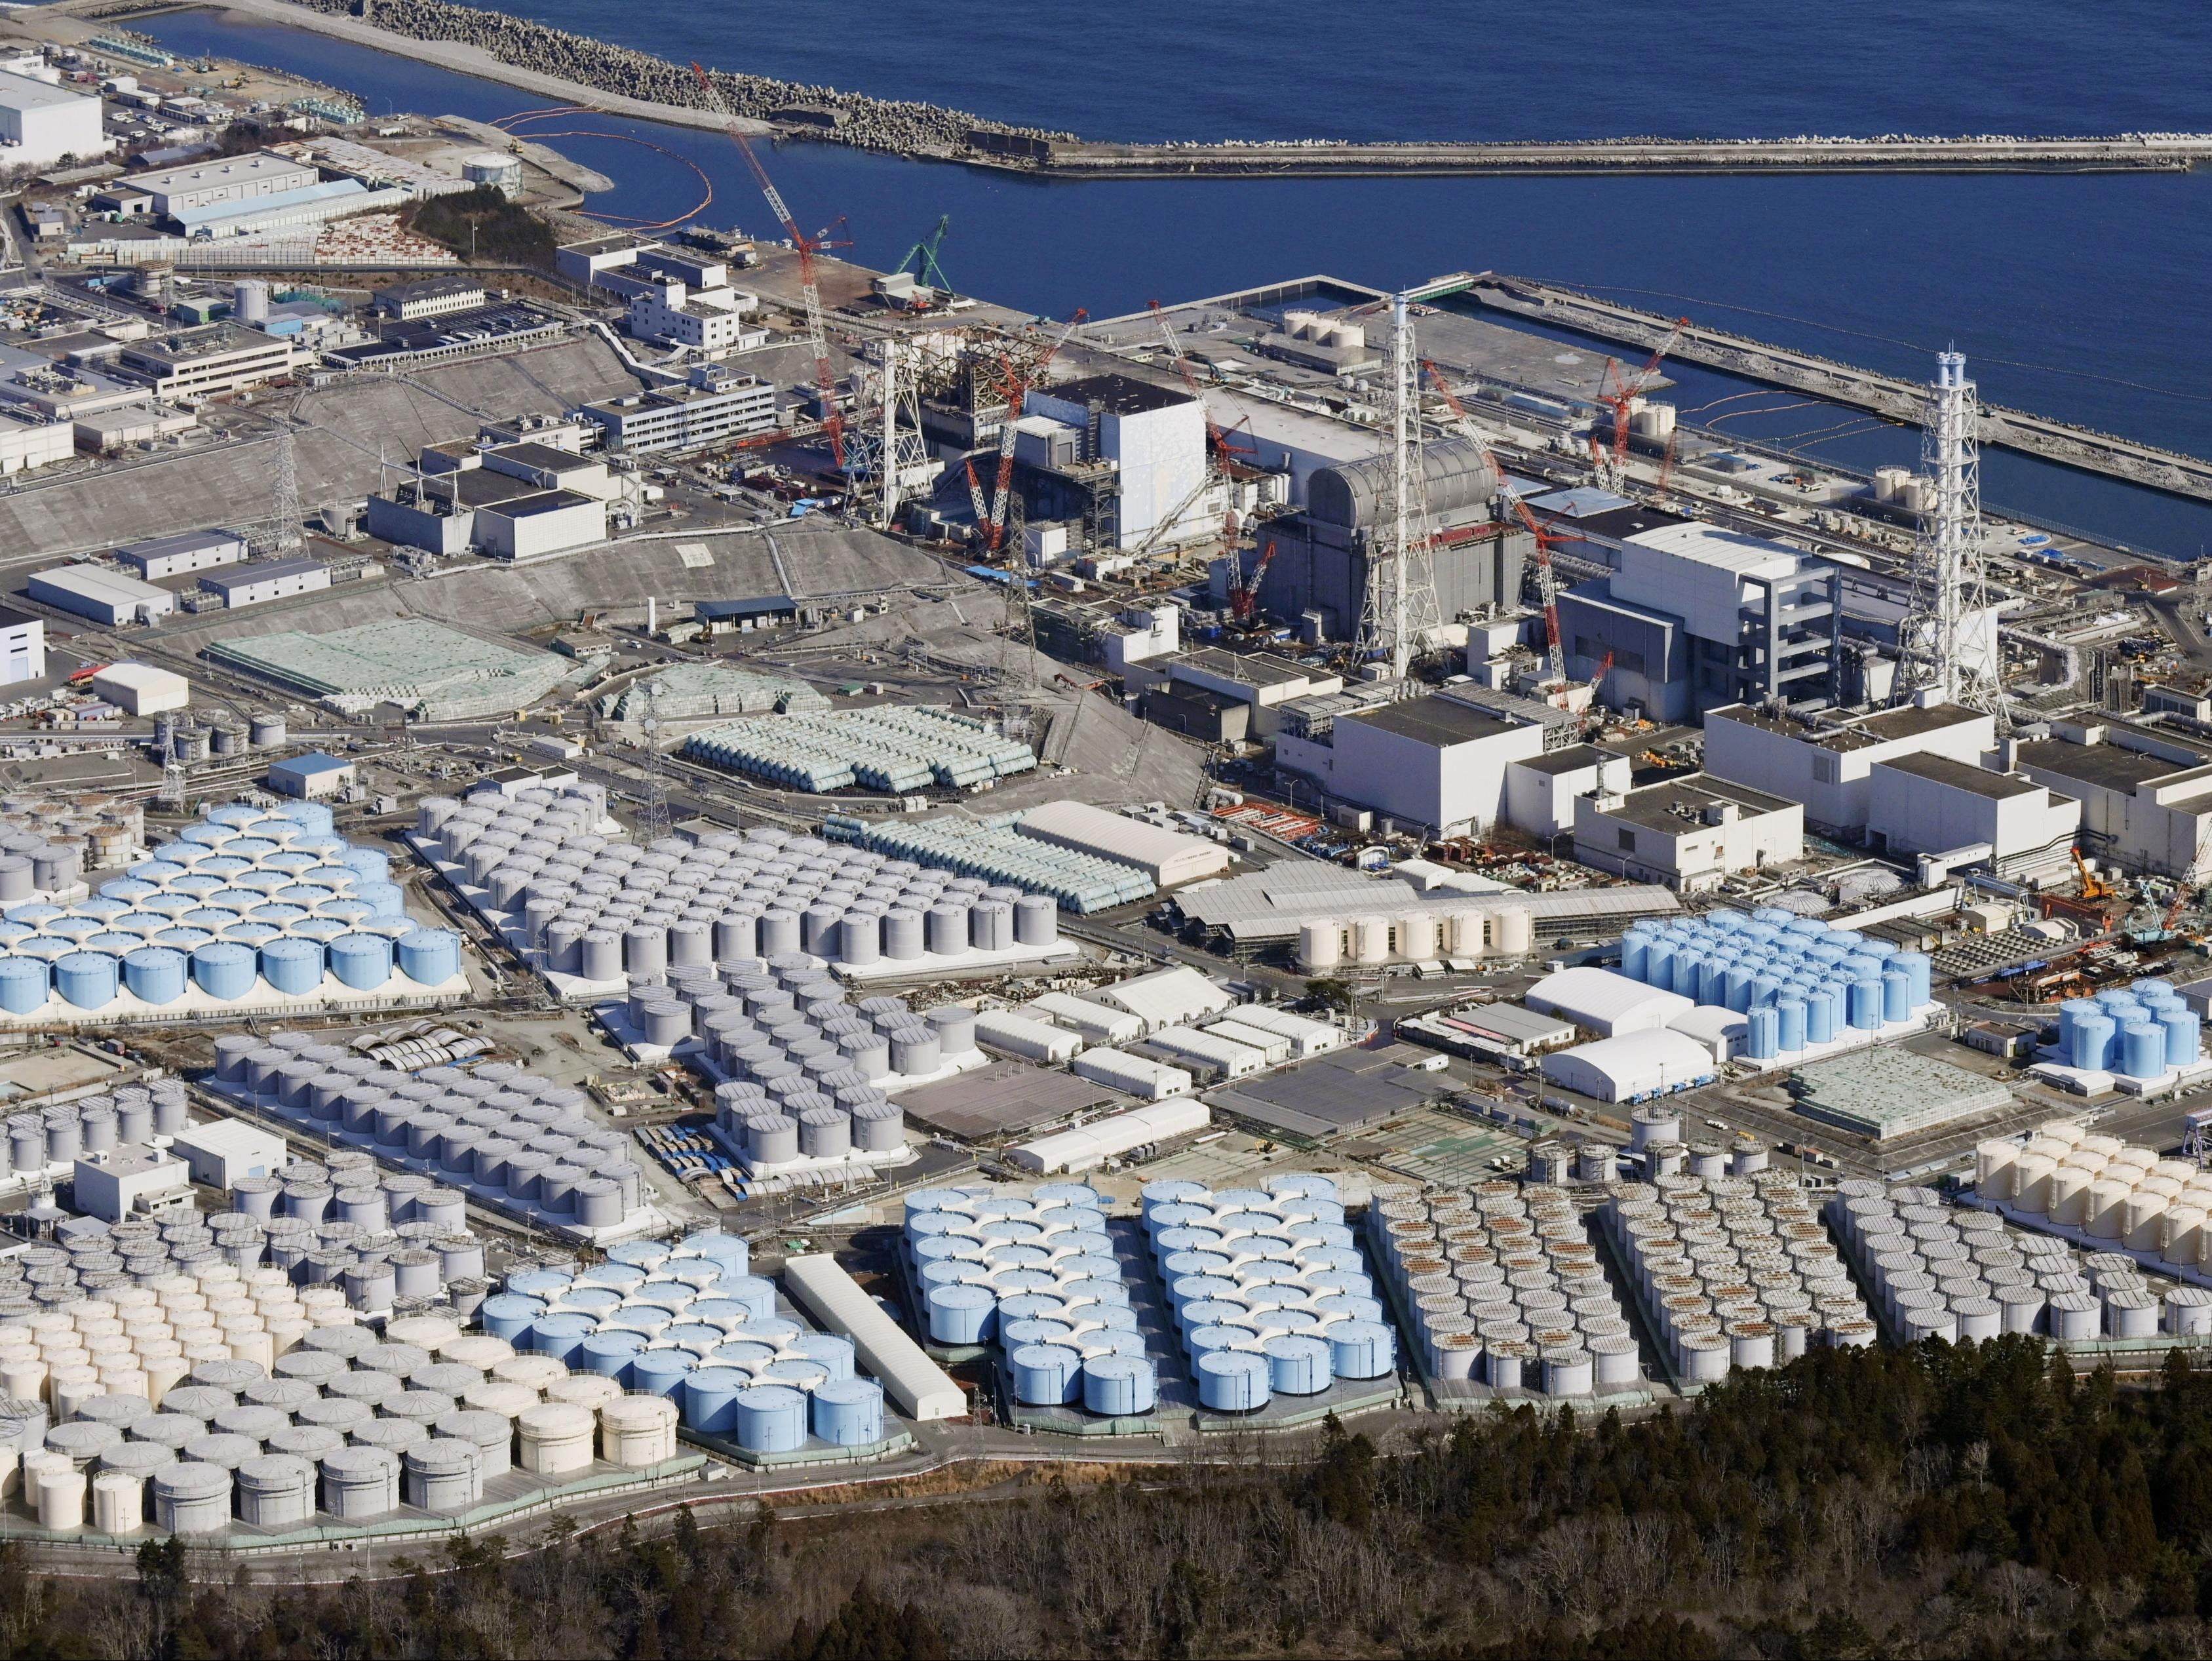 Japan plans to release into the Pacific more than one million metric tons of water that was used to cool damaged reactors from the Fukushima nuclear plant